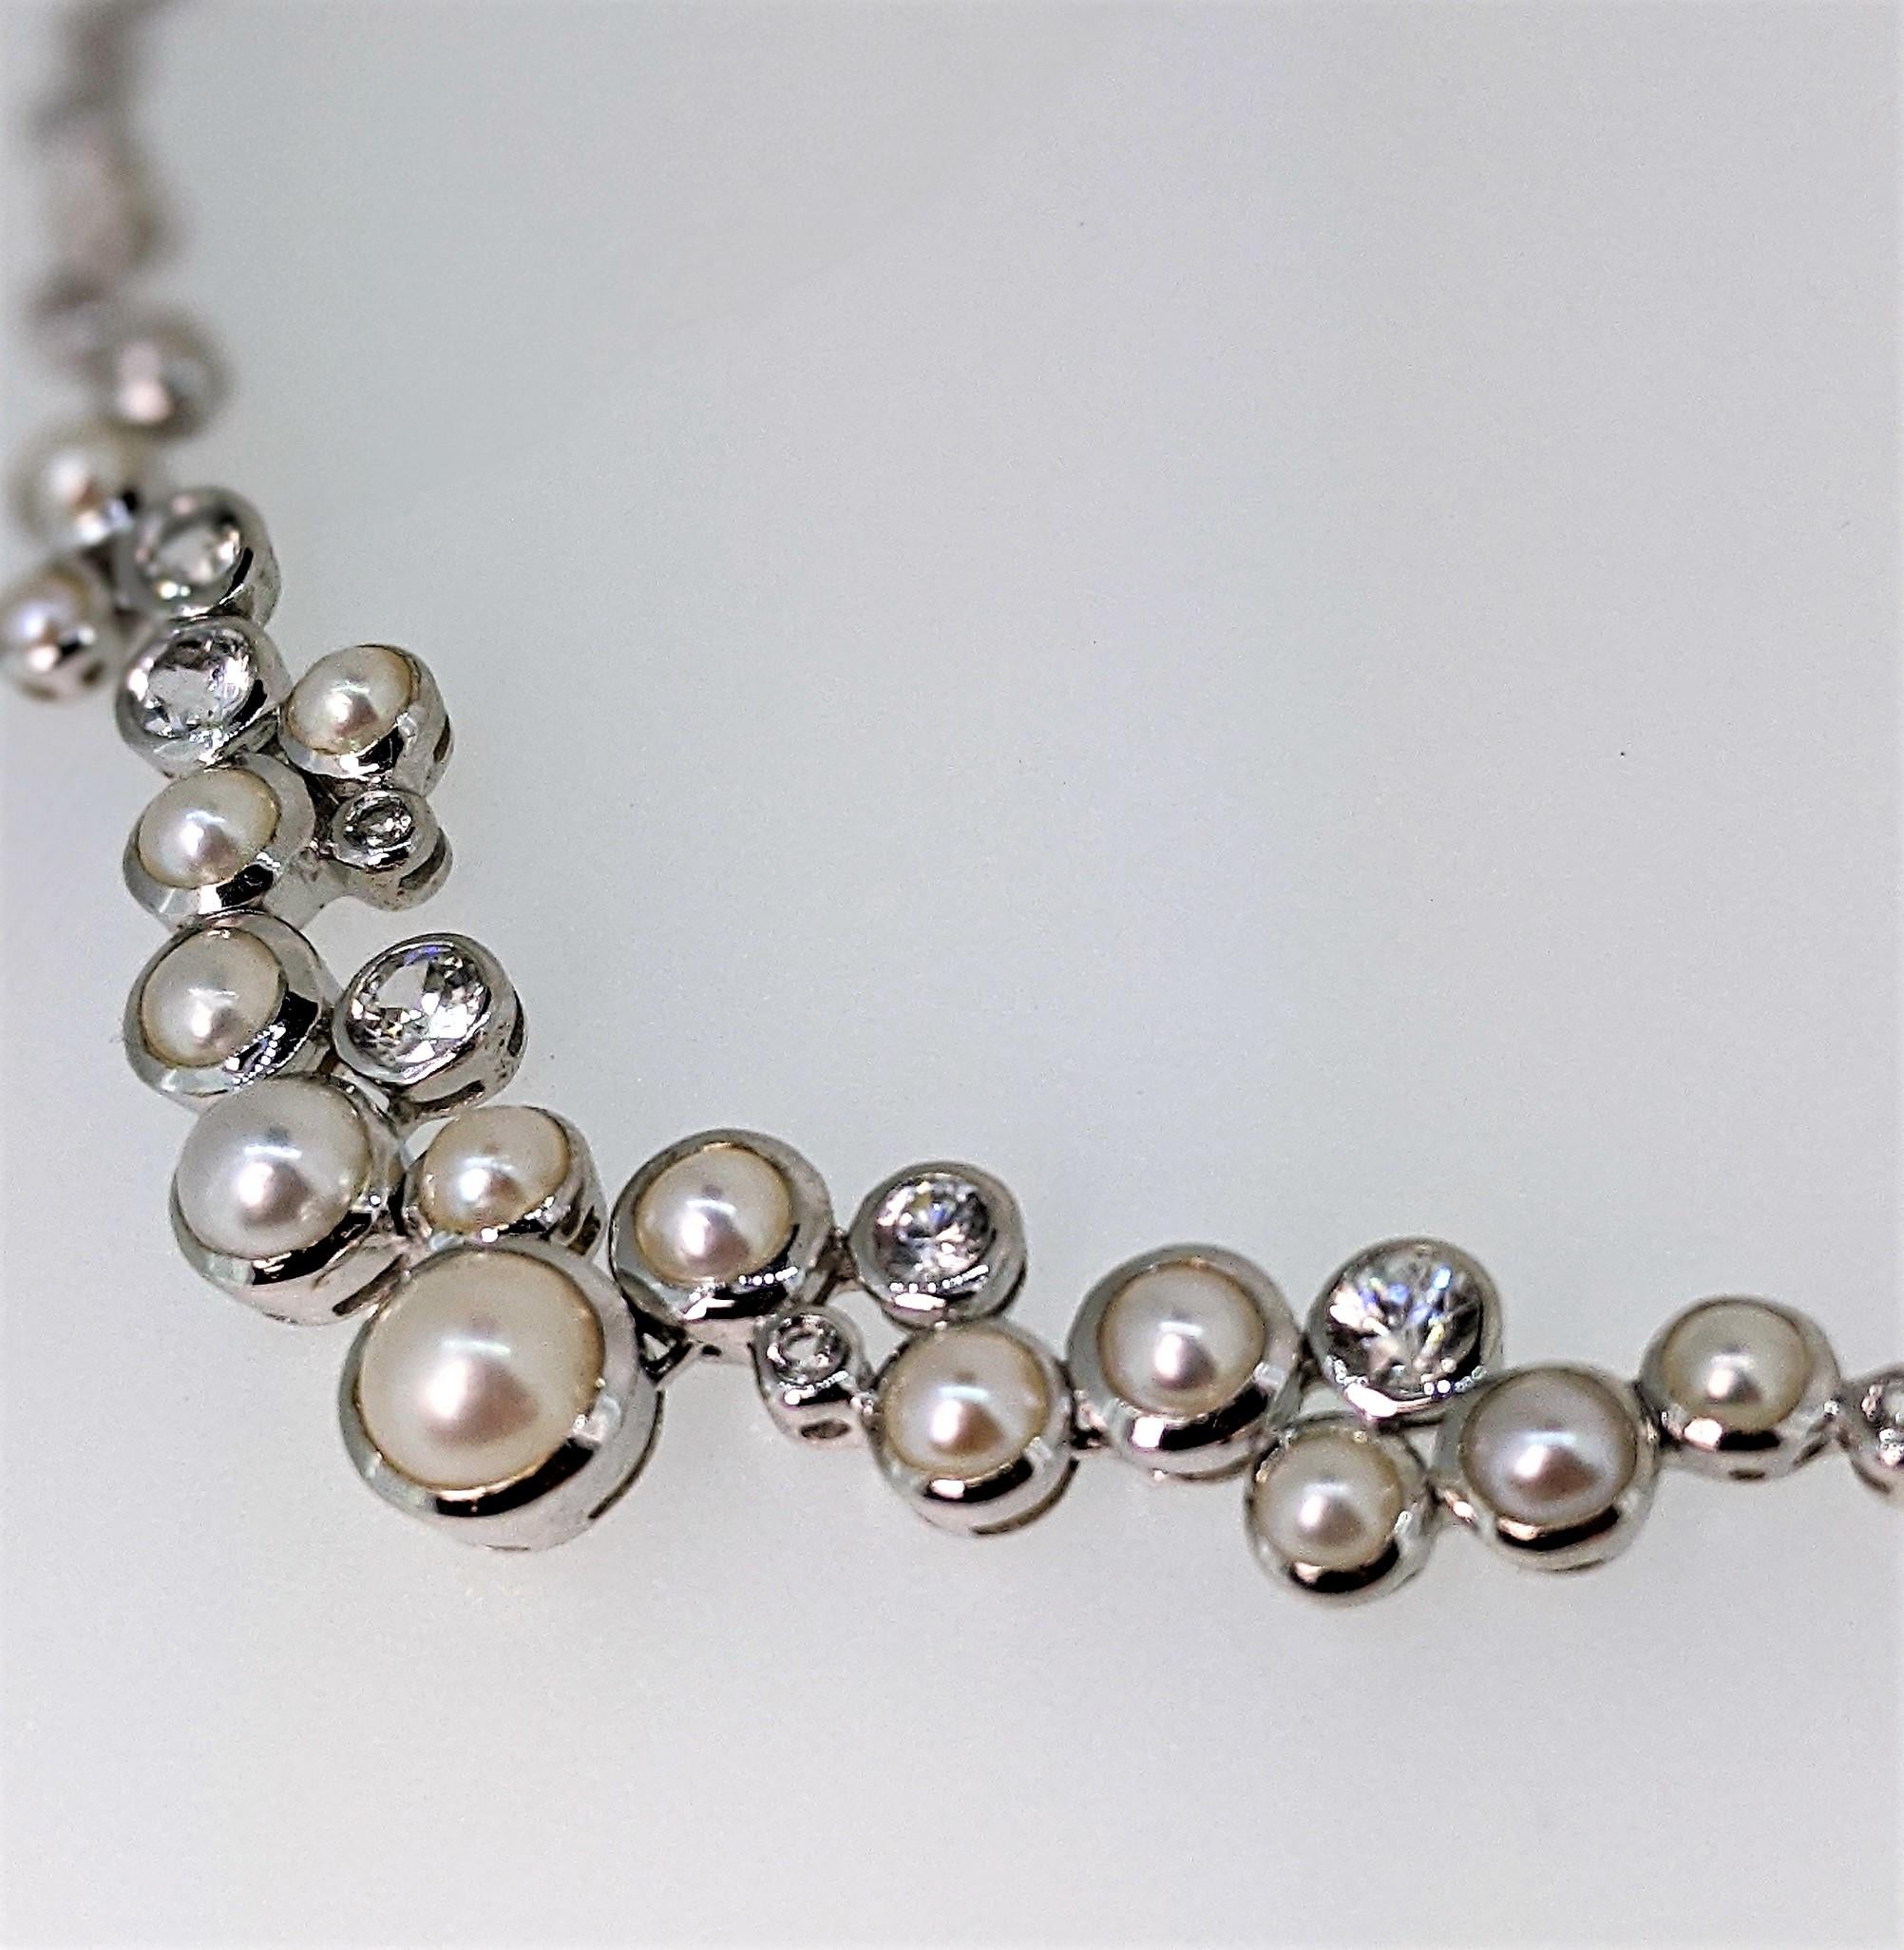 From the Shooting Stars collection, this is the Constellation necklace is in sterling silver with lovely natural and white freshwater pearls and sparkling zircon (These are NOT lab created cubic zirconium stones, but real stones - and they honestly